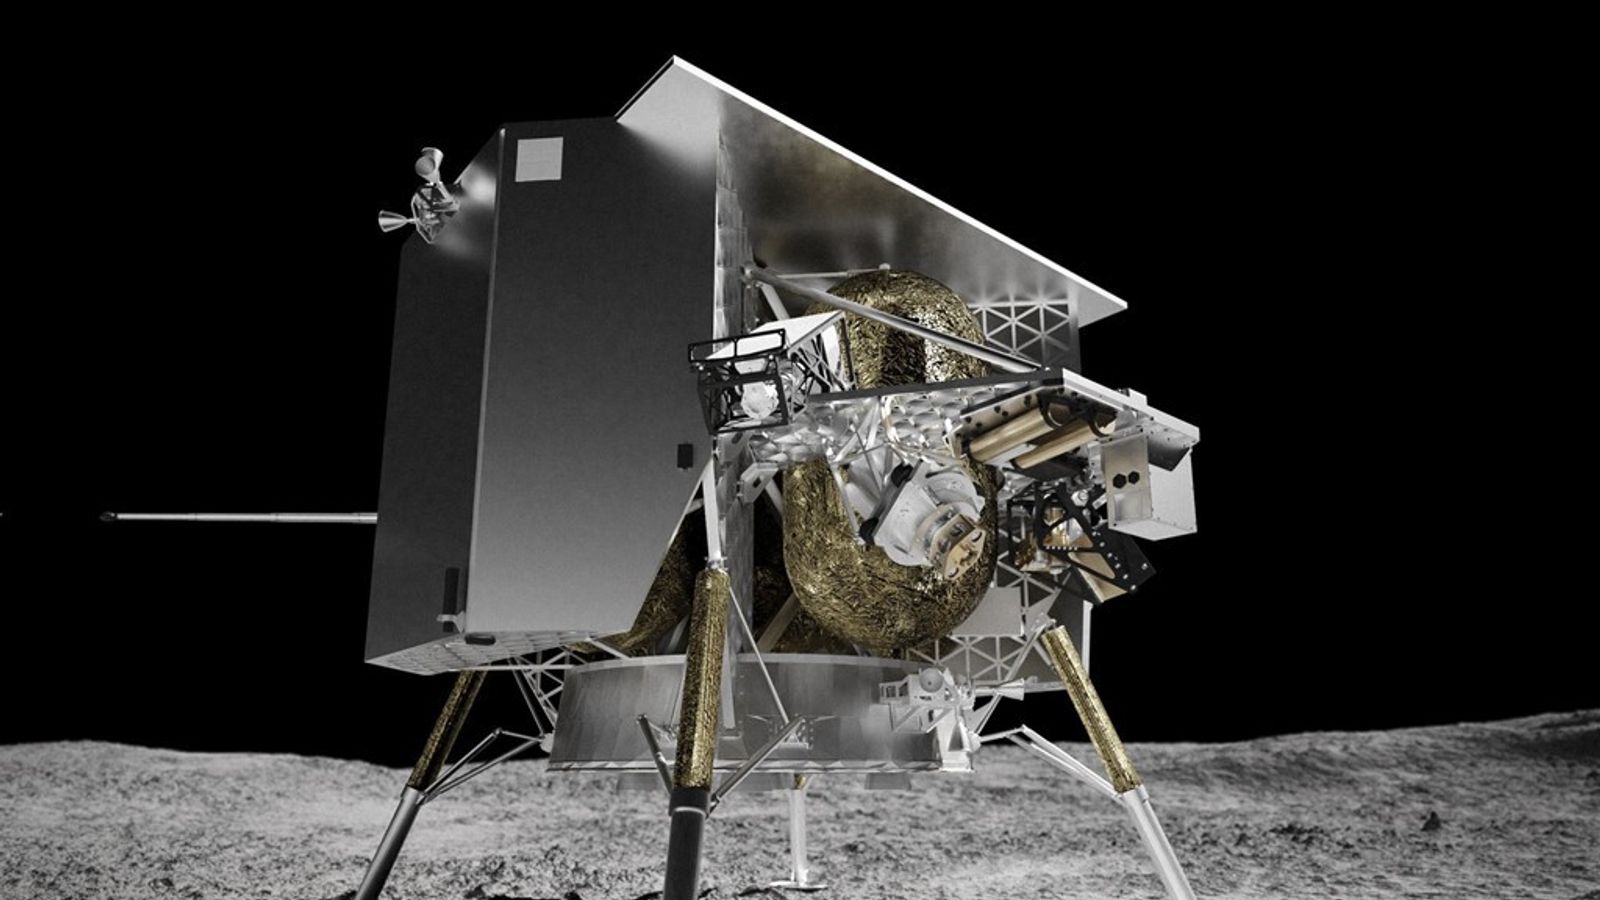 Doomed Peregrine moon lander will ‘burn up’ on return to Earth after failed mission, says Astrobotic | World News – The TechLead